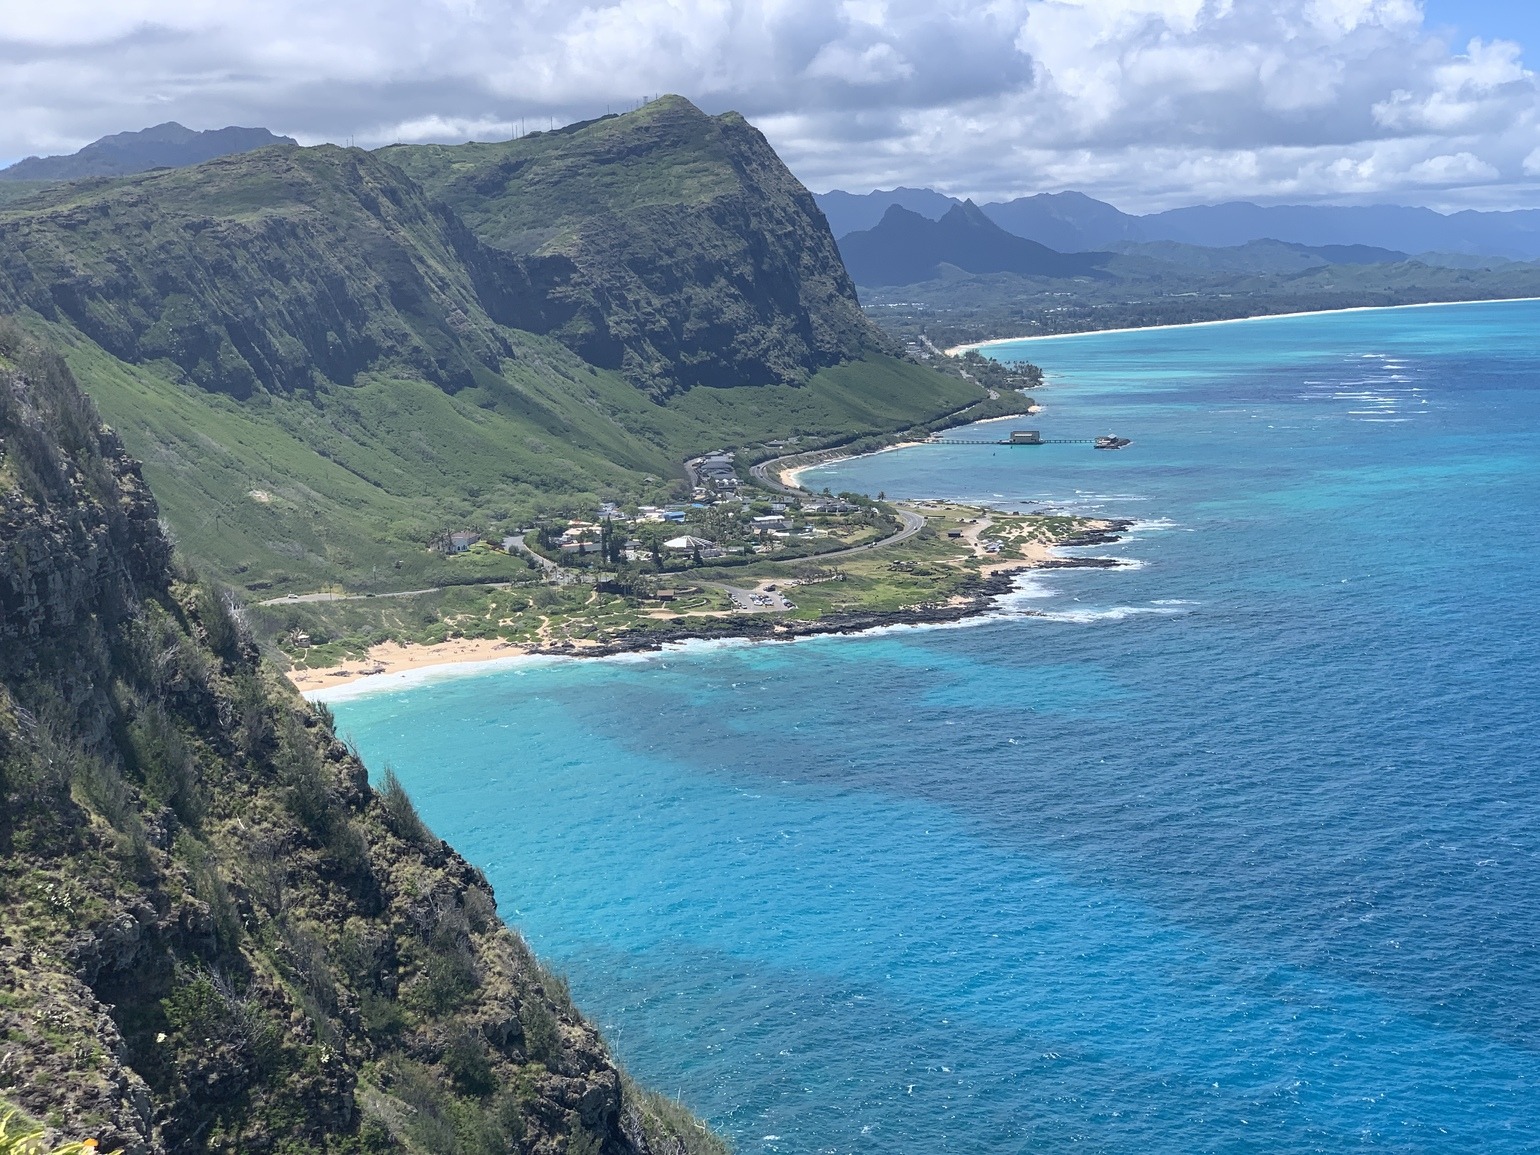 Is This the Best Way to Get to Hawaii?